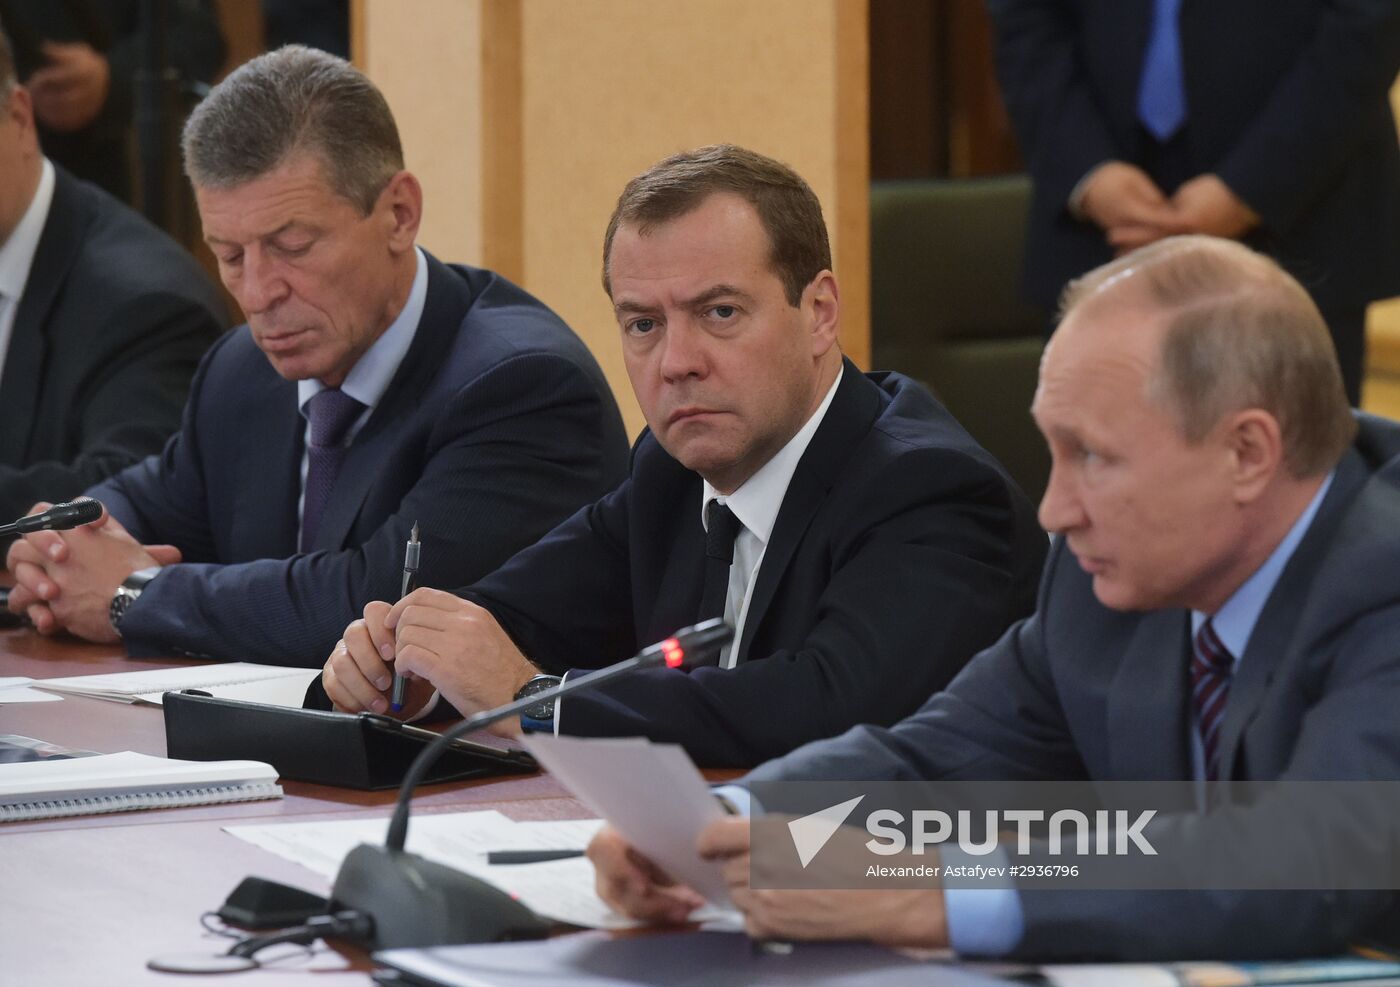 Russian President Vladimir Putin's and Russian Prime Minister Dmitry Medvedev's working visit to South administrative district